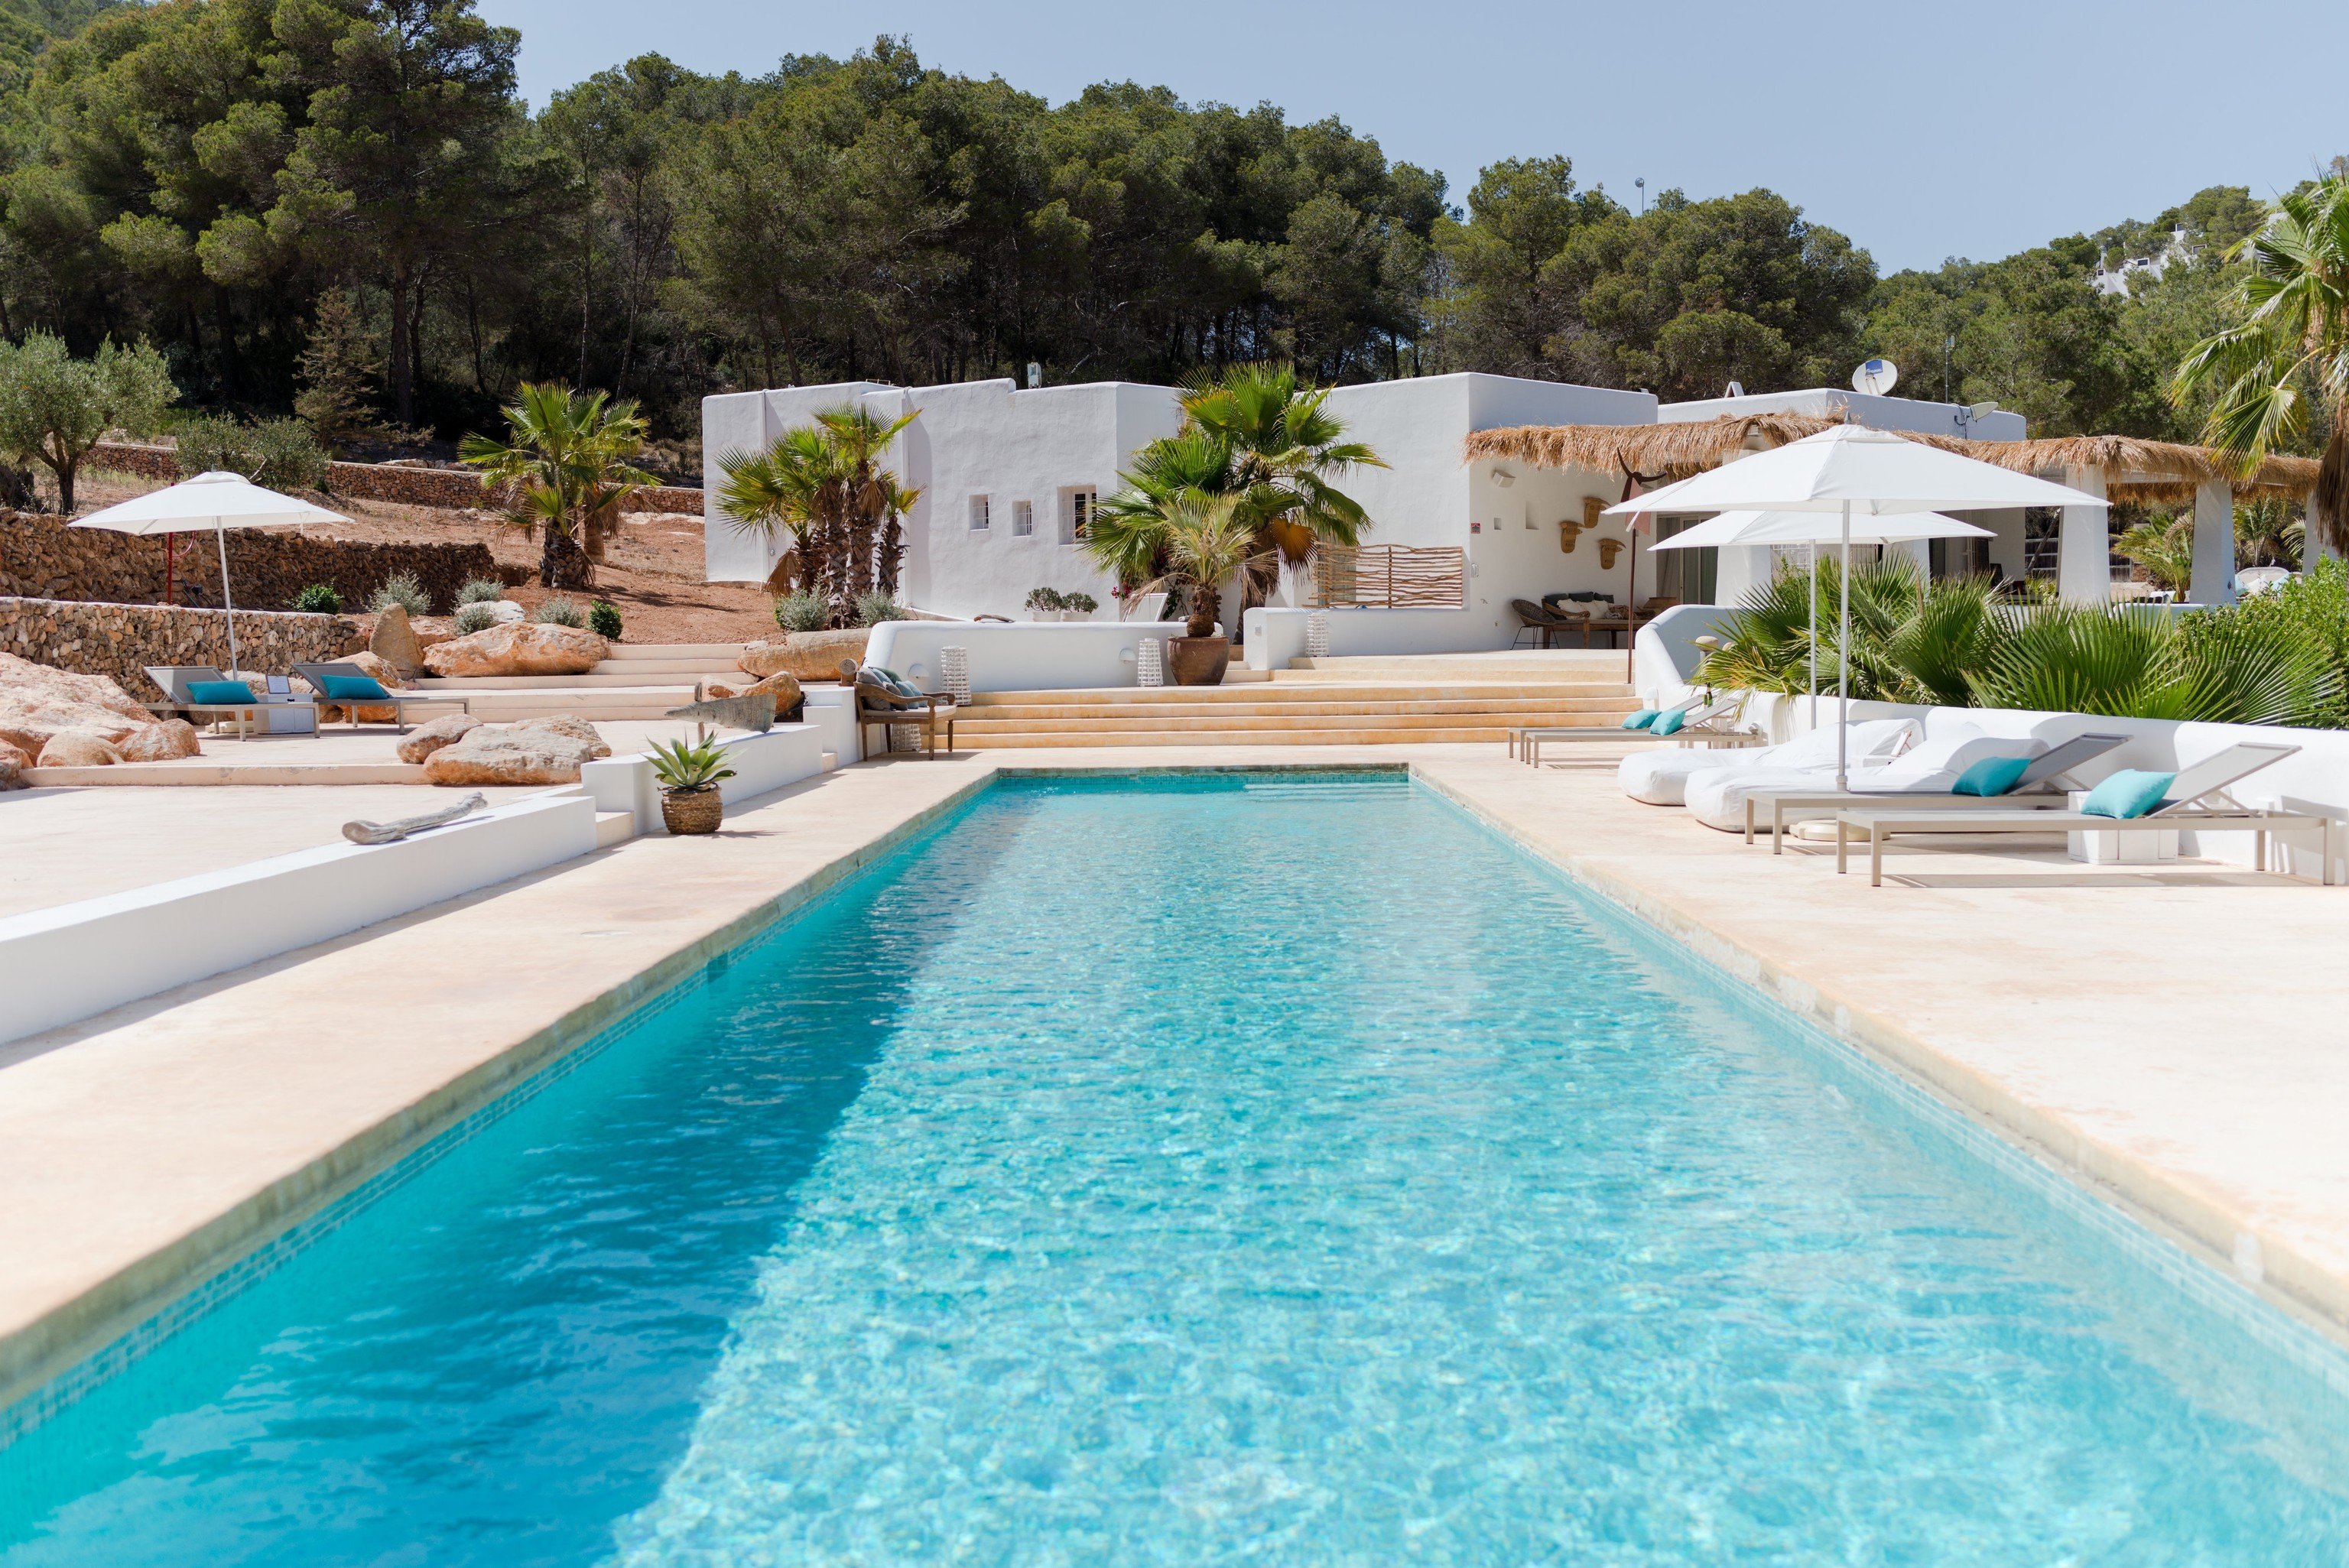 The 10 Best Boutique Hotels in Ibiza, Spain - niood